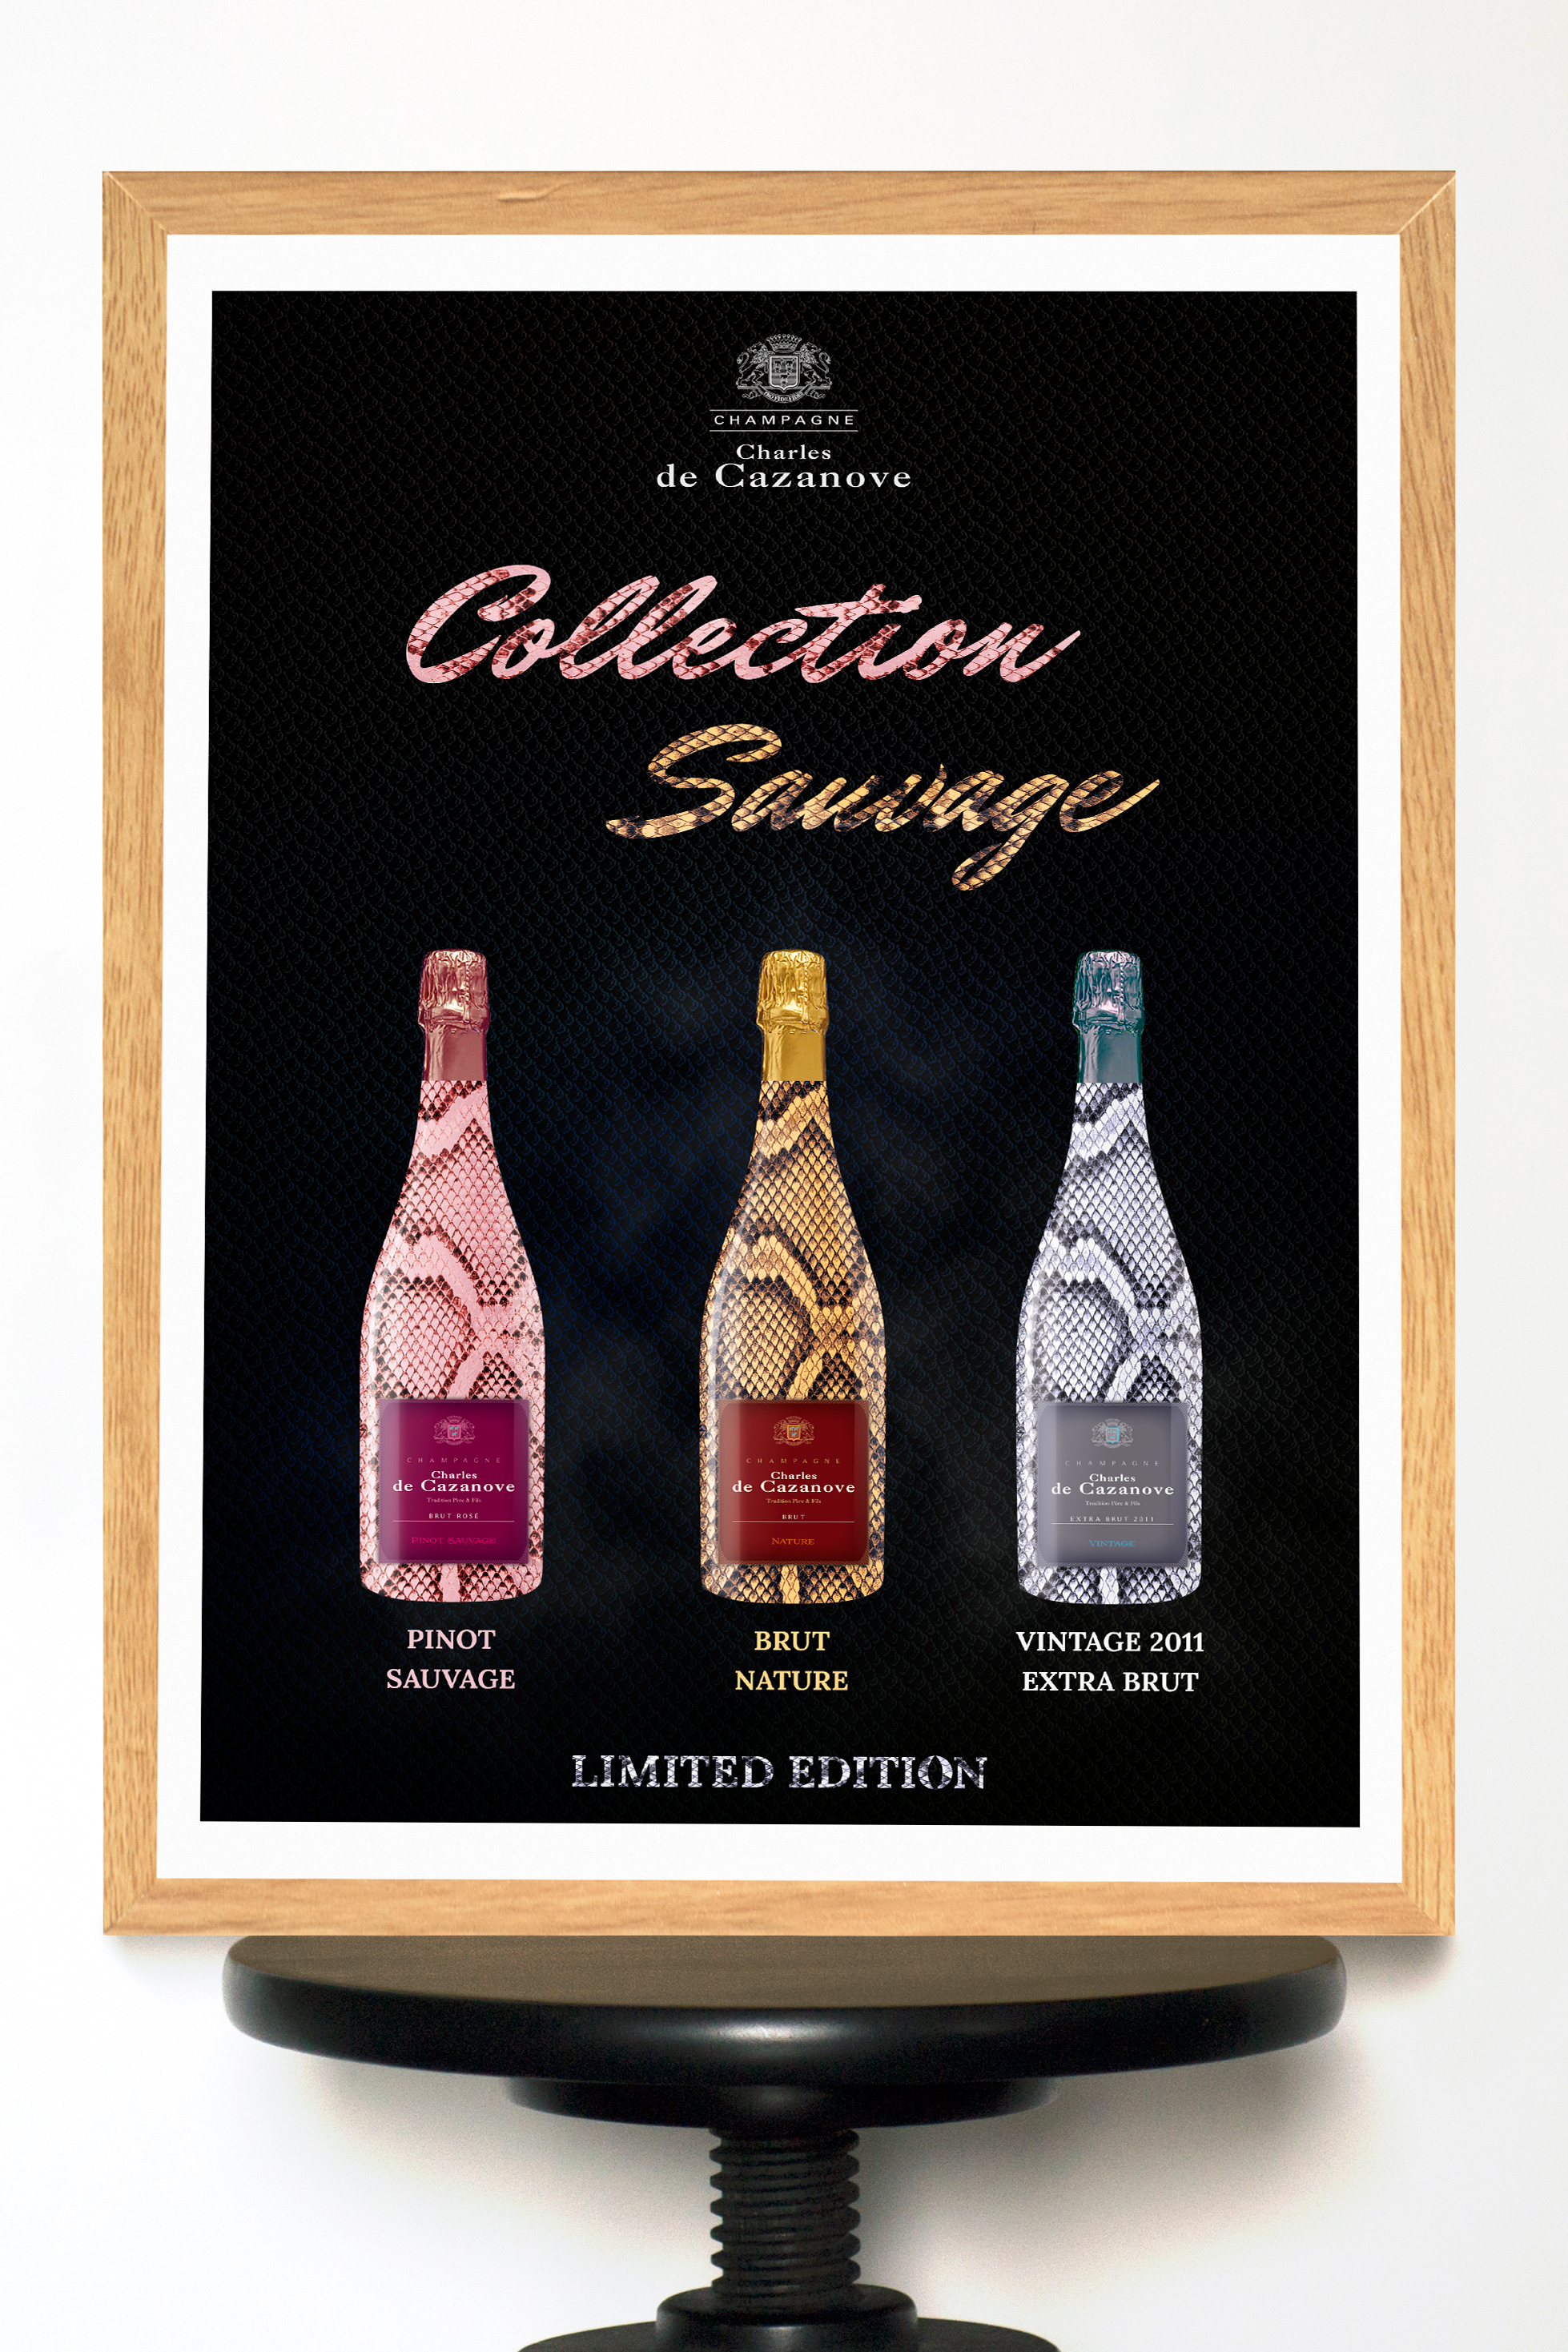 Collection Sauvage du Champagne Charles de Cazanove.